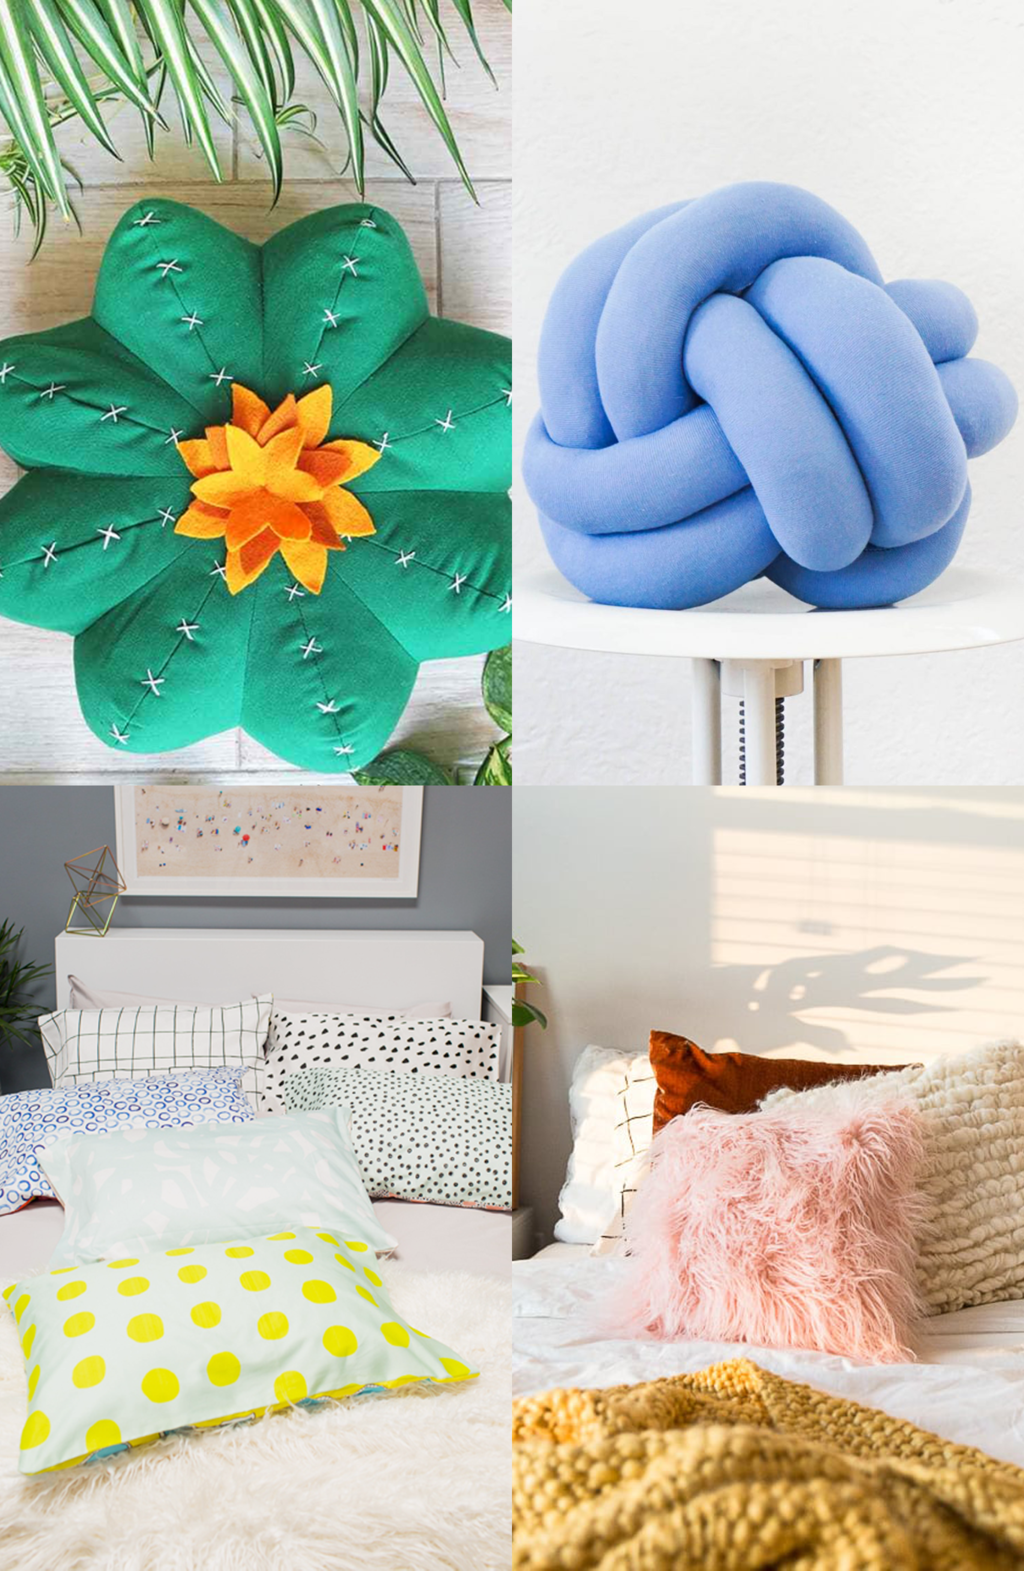 DIY Pillow Ideas for your home by Sugar & Cloth